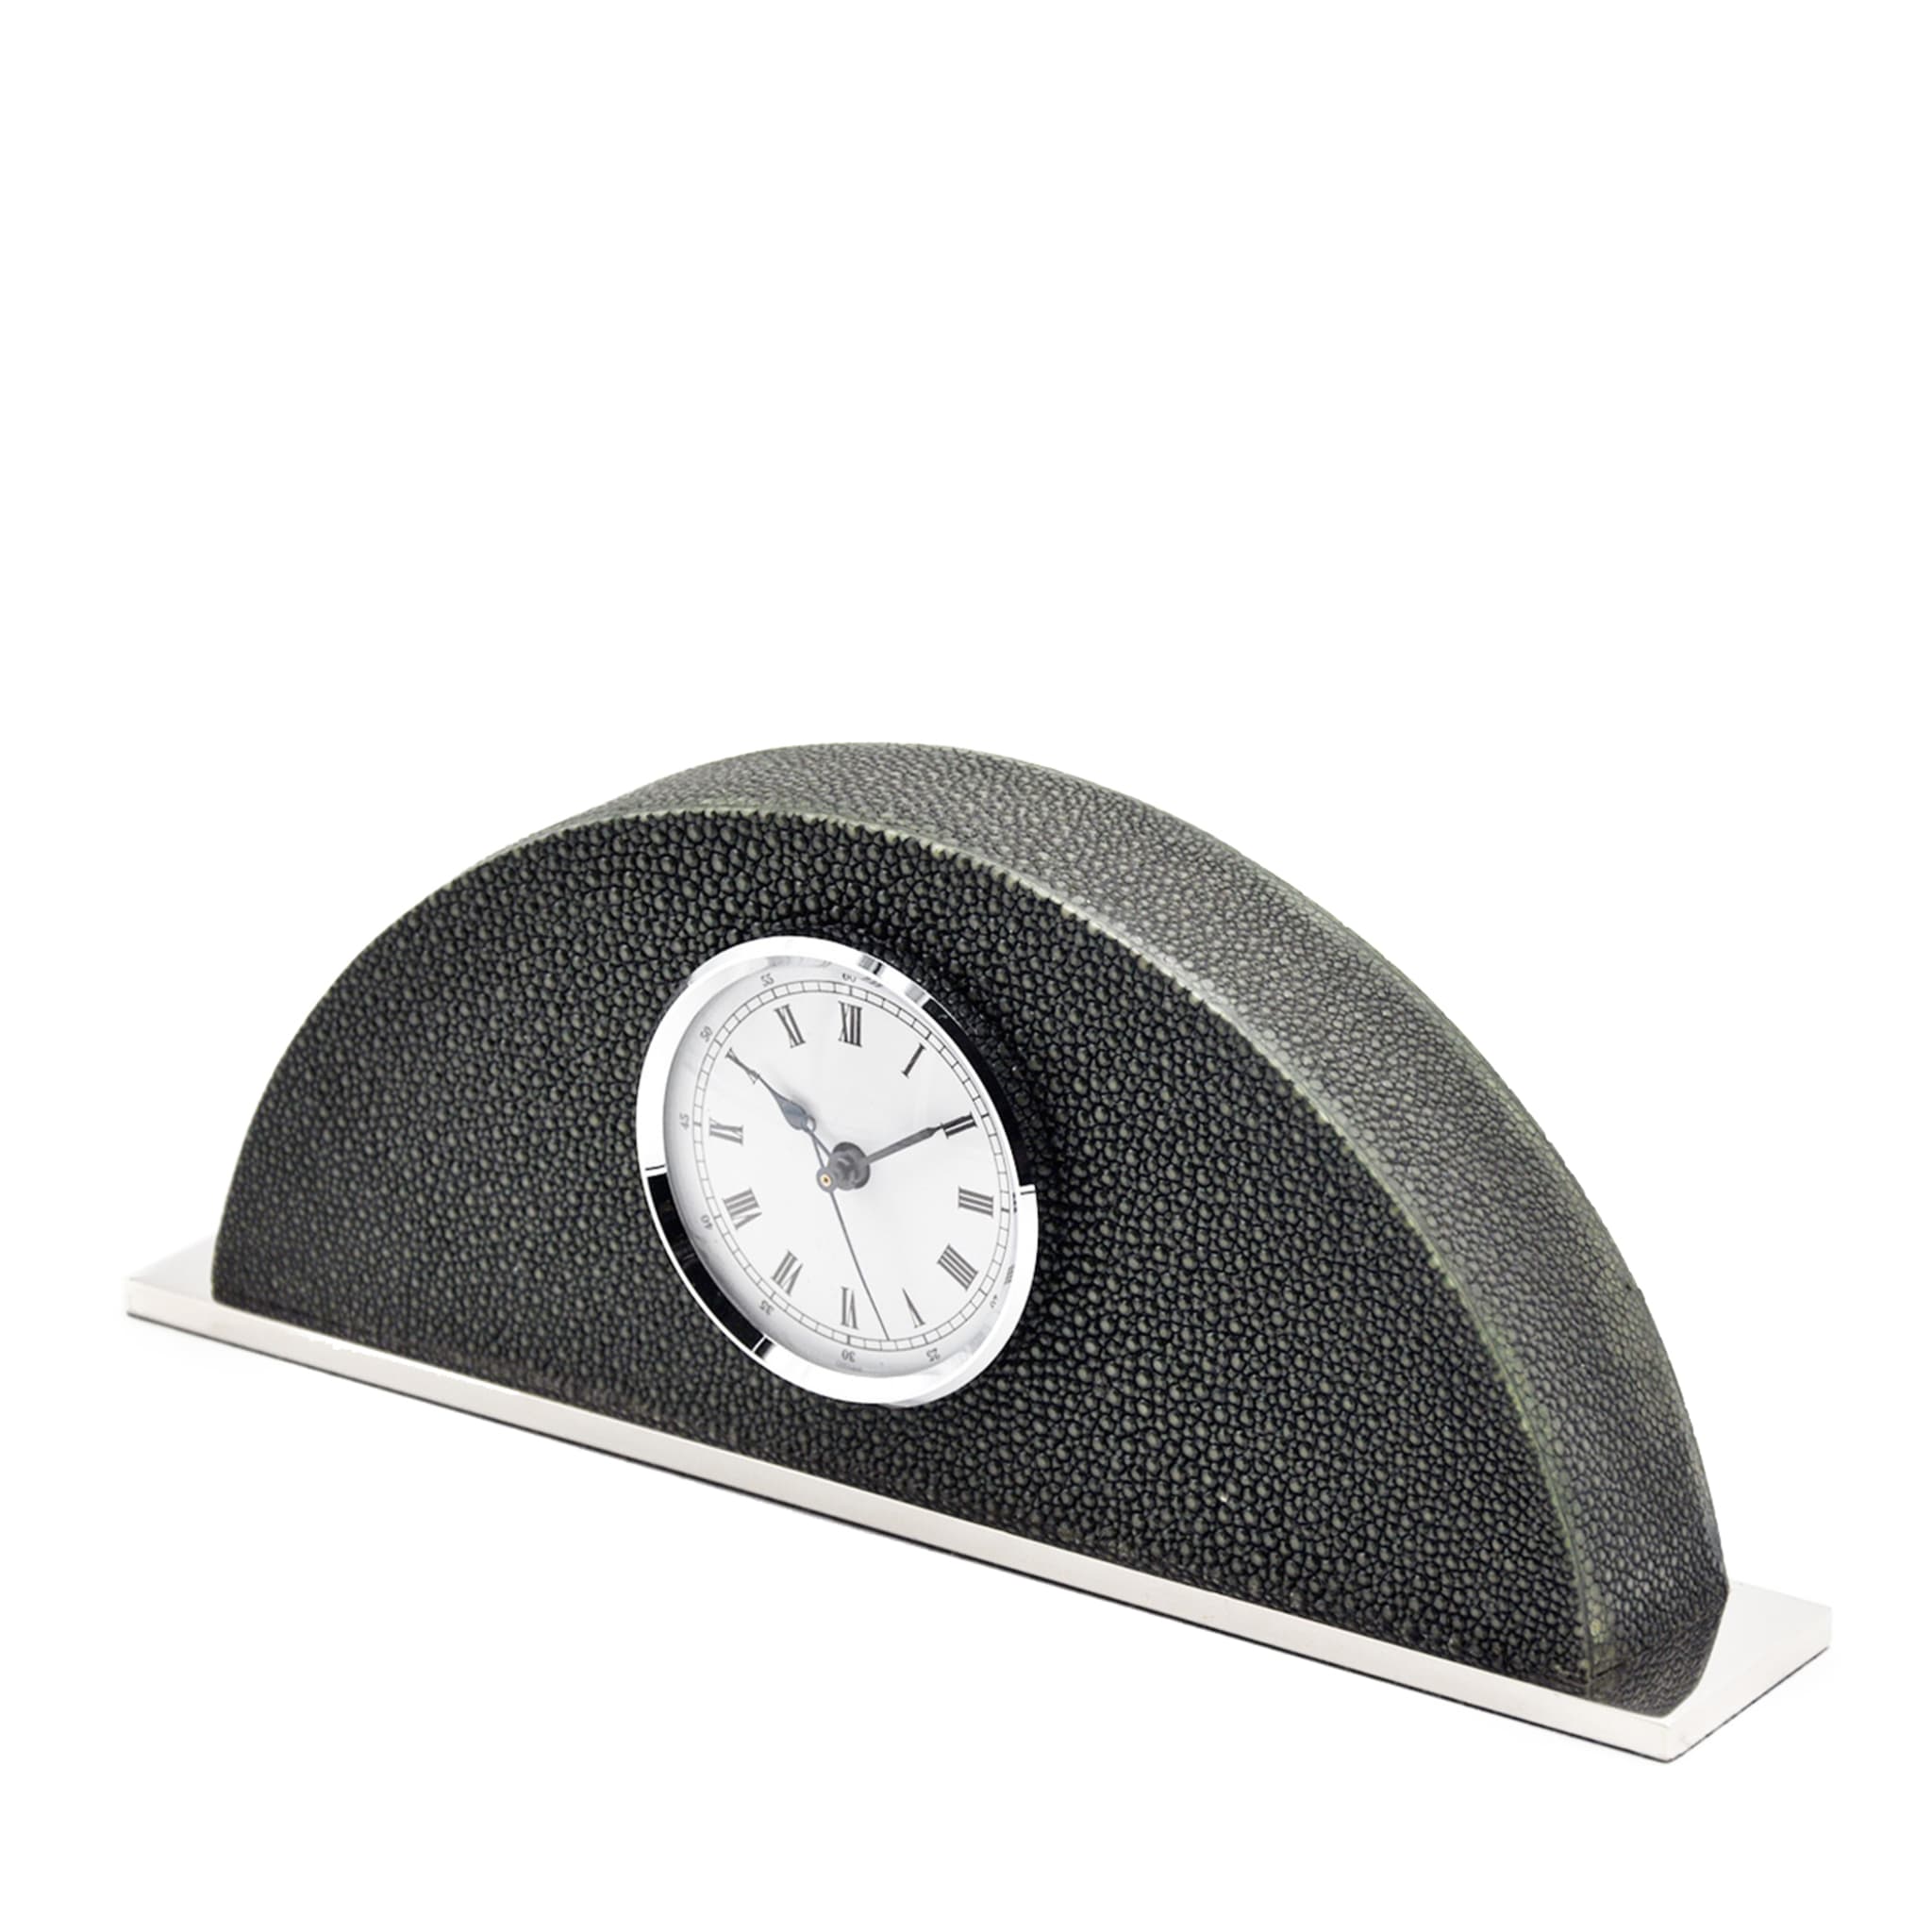 Galucharme Forest-Green Shagreen Table Clock by Nino Basso - Alternative view 1